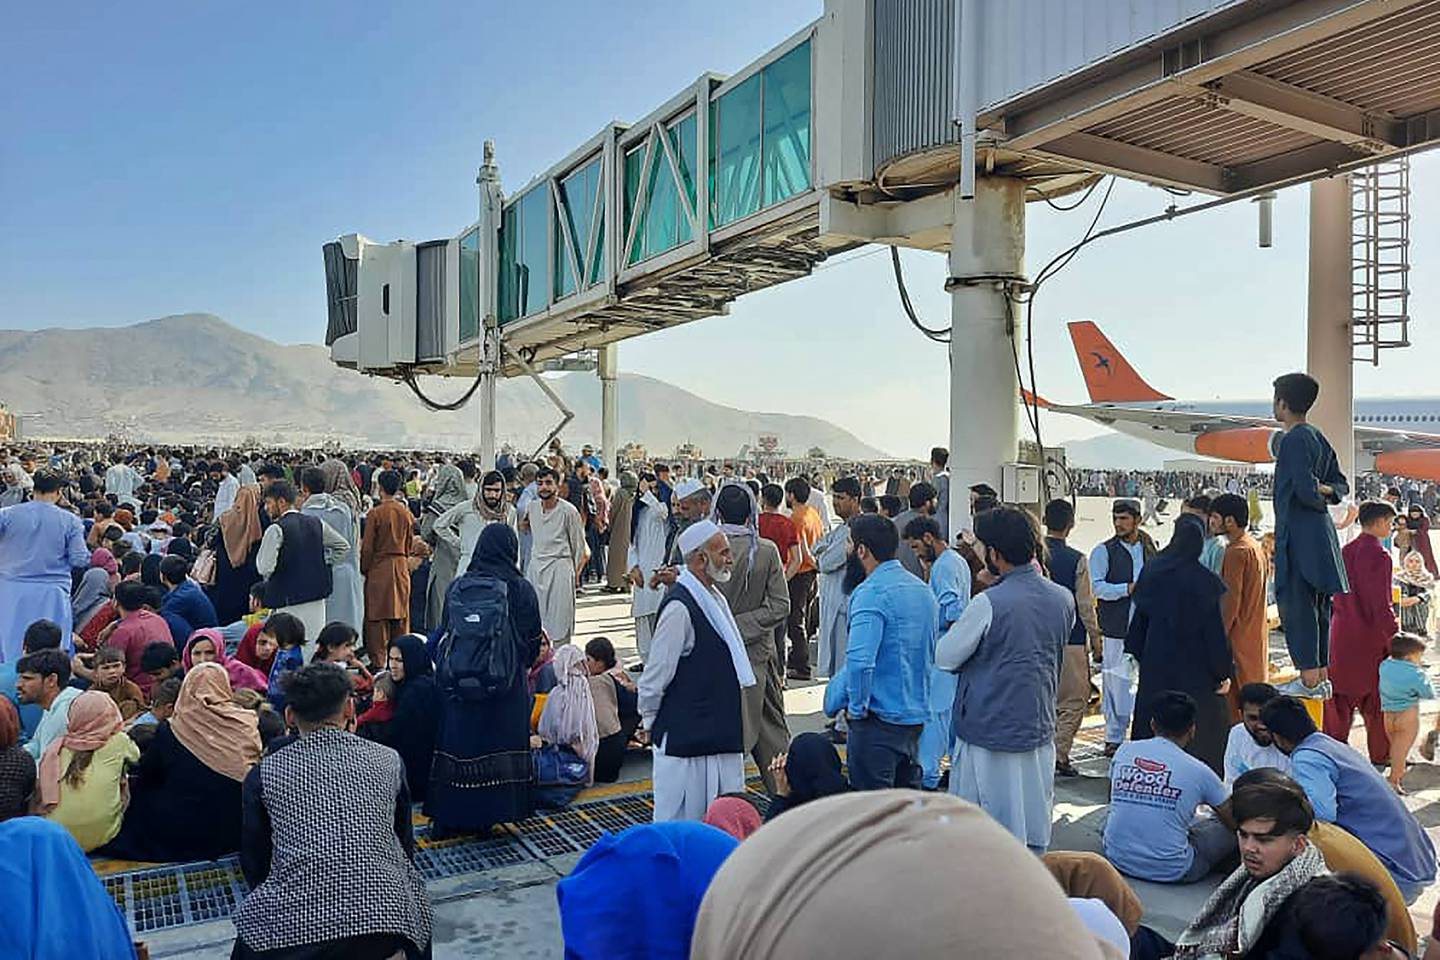 Afghans crowd at the tarmac of the Kabul airport on August 16, last year, to flee the country. The Taliban seized control of Afghanistan after President Ashraf Ghani fled the country. AFP